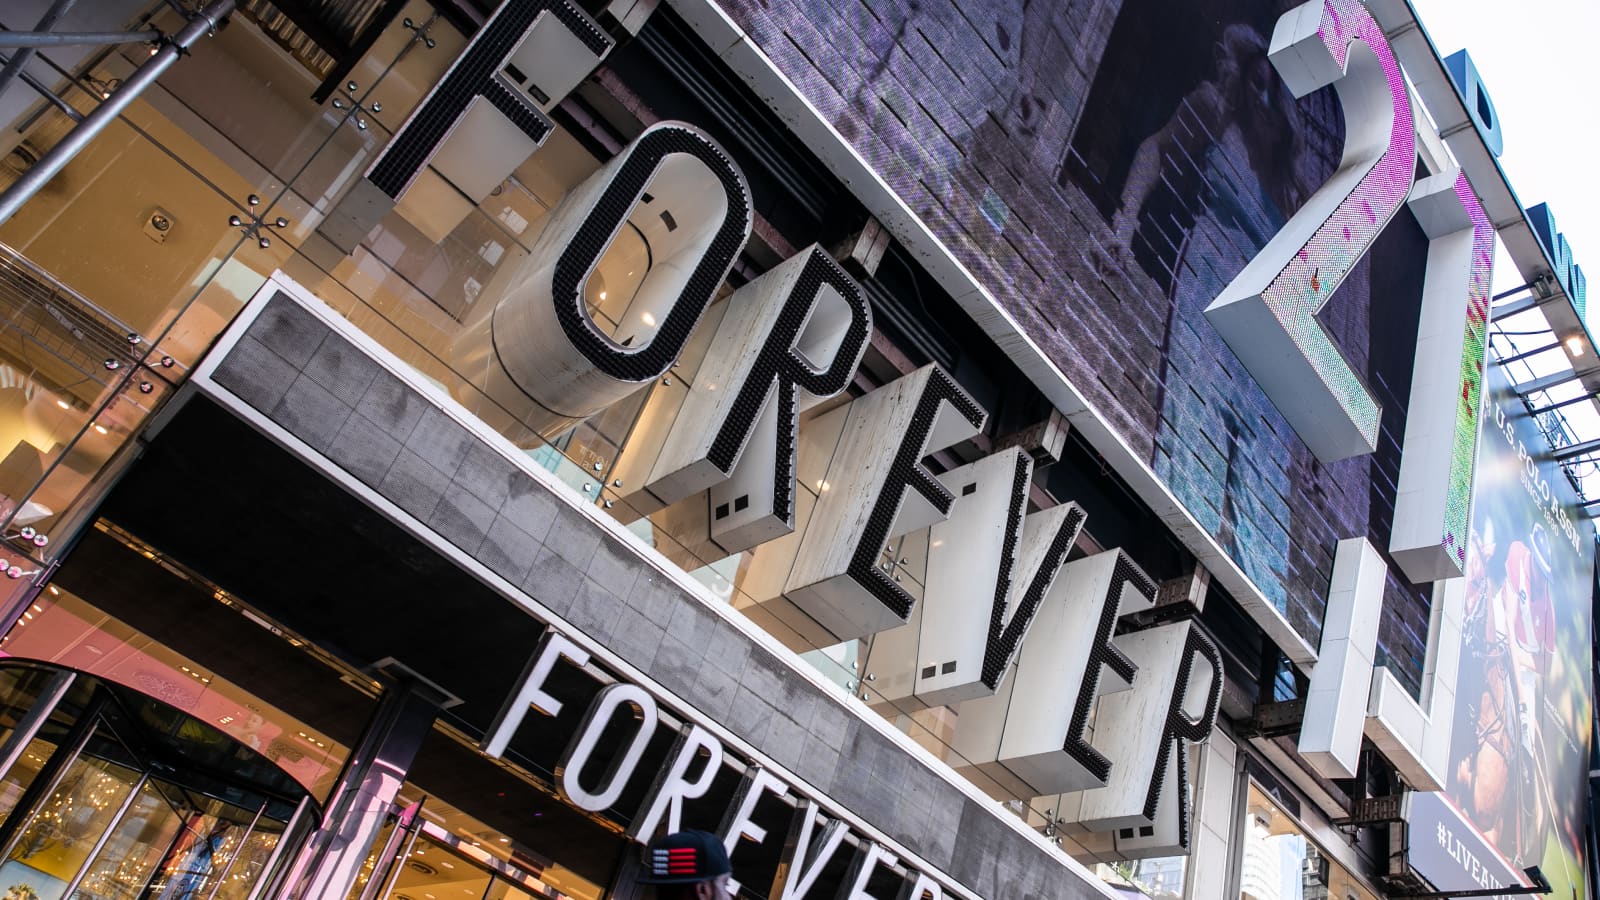 Forever 21 Opens New Hollywood & Highland Store